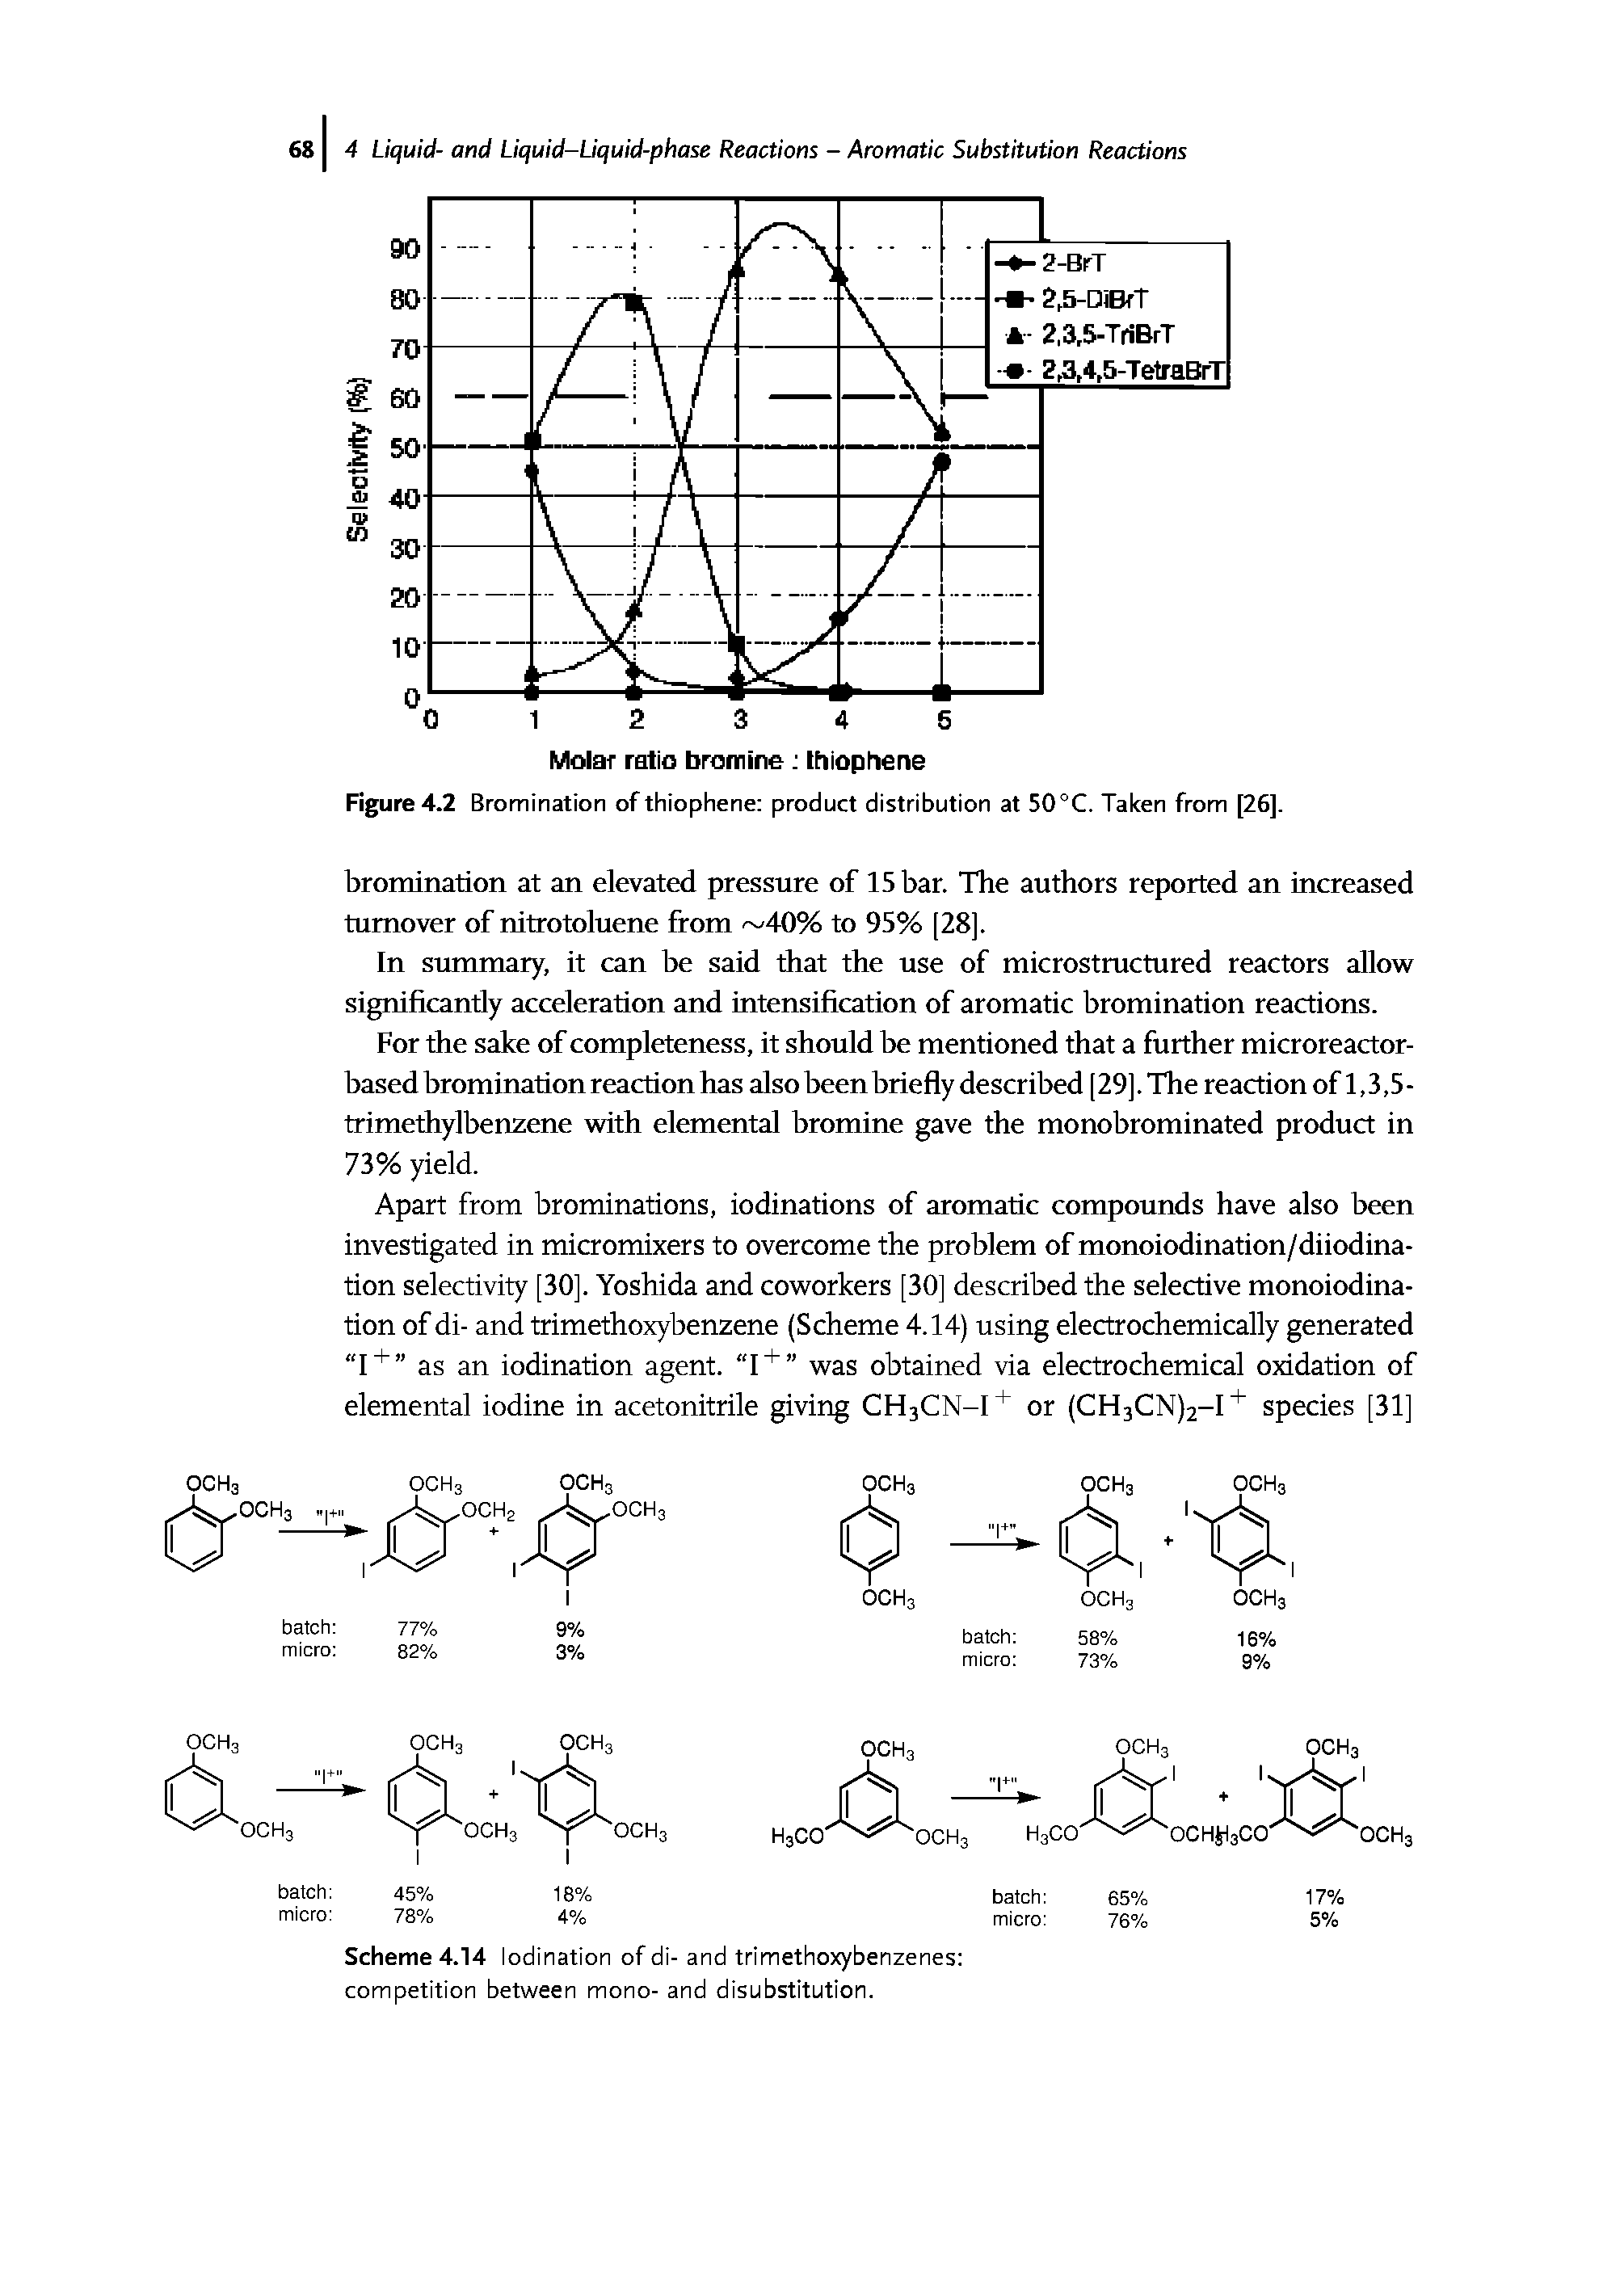 Figure 4.2 Bromination of thiophene product distribution at 50°C. Taken from [26].